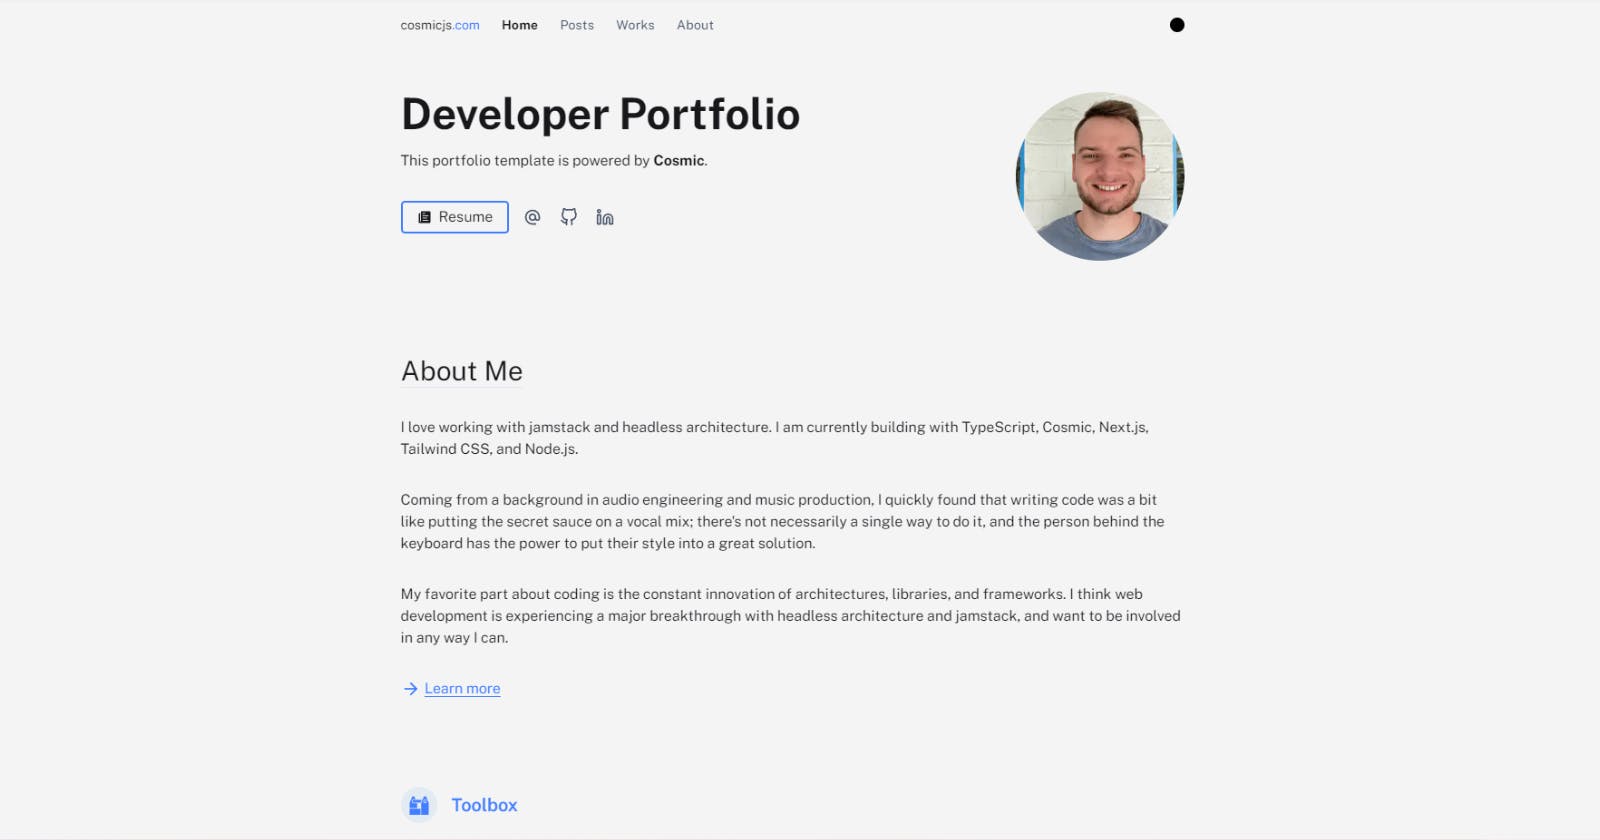 Creating a Developer Portfolio with Next.js and Cosmic